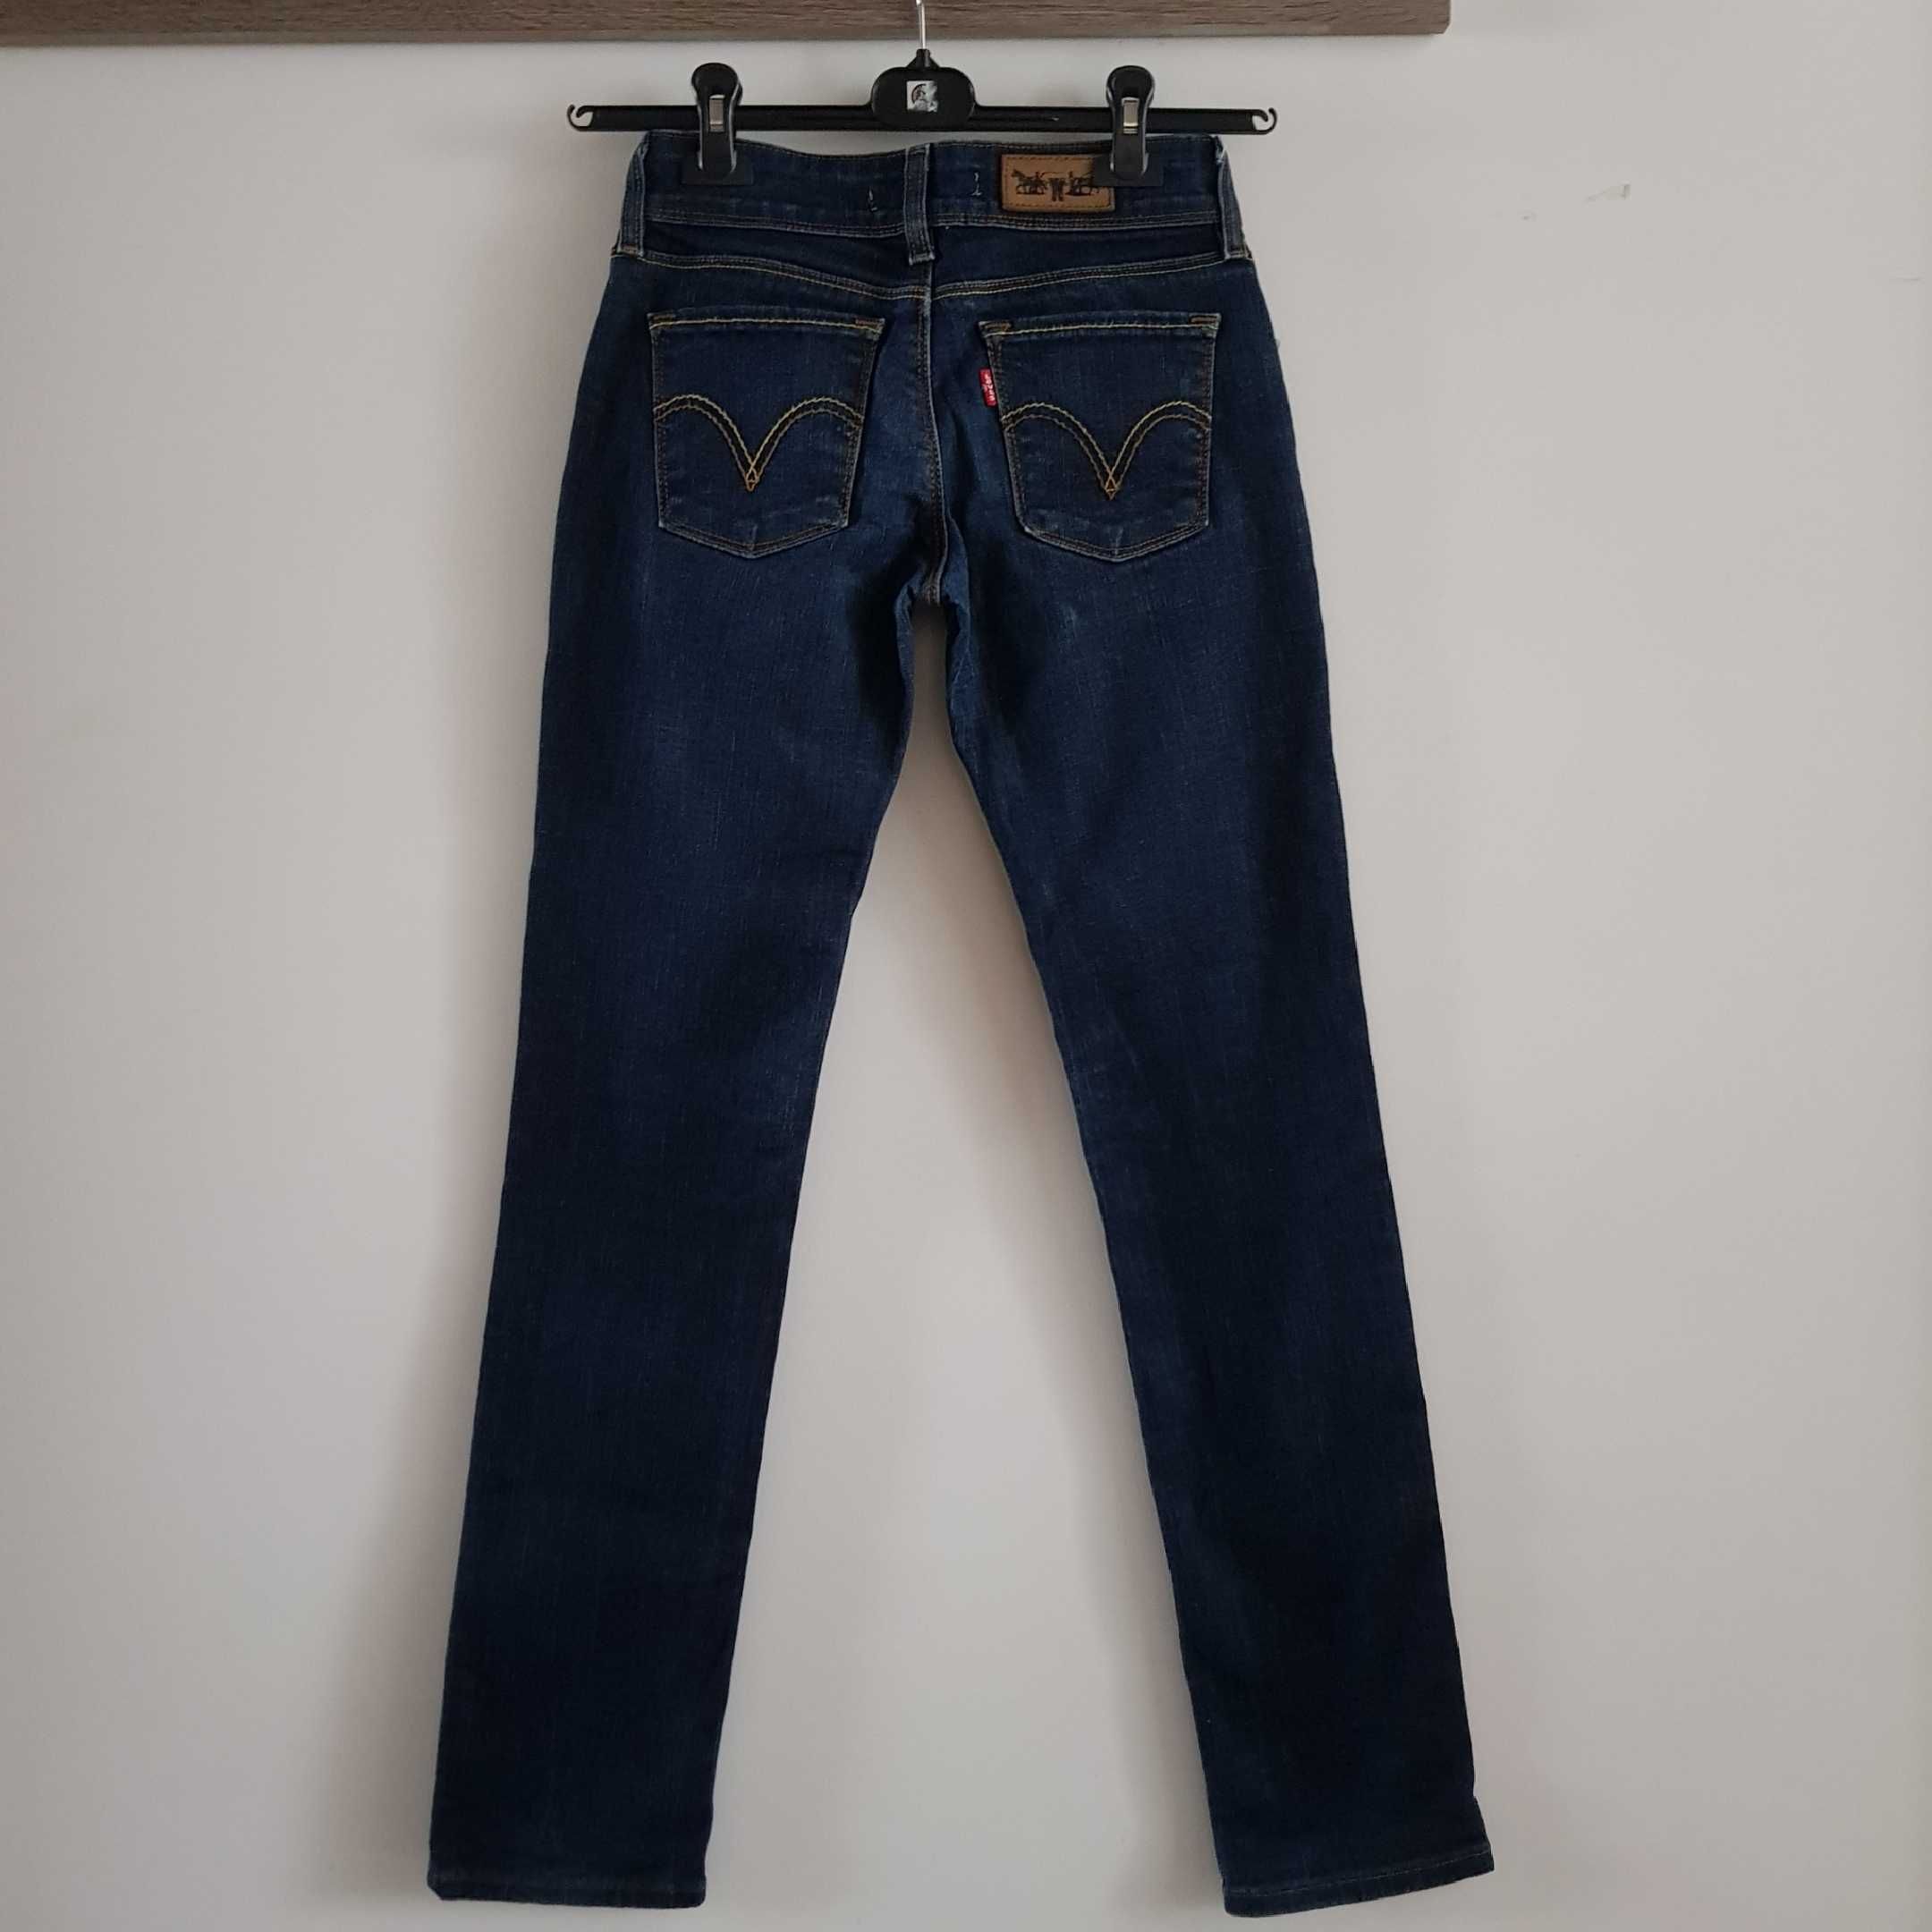 Jeansy Levis r 26/32 ,  Xs/S 571 slim fit